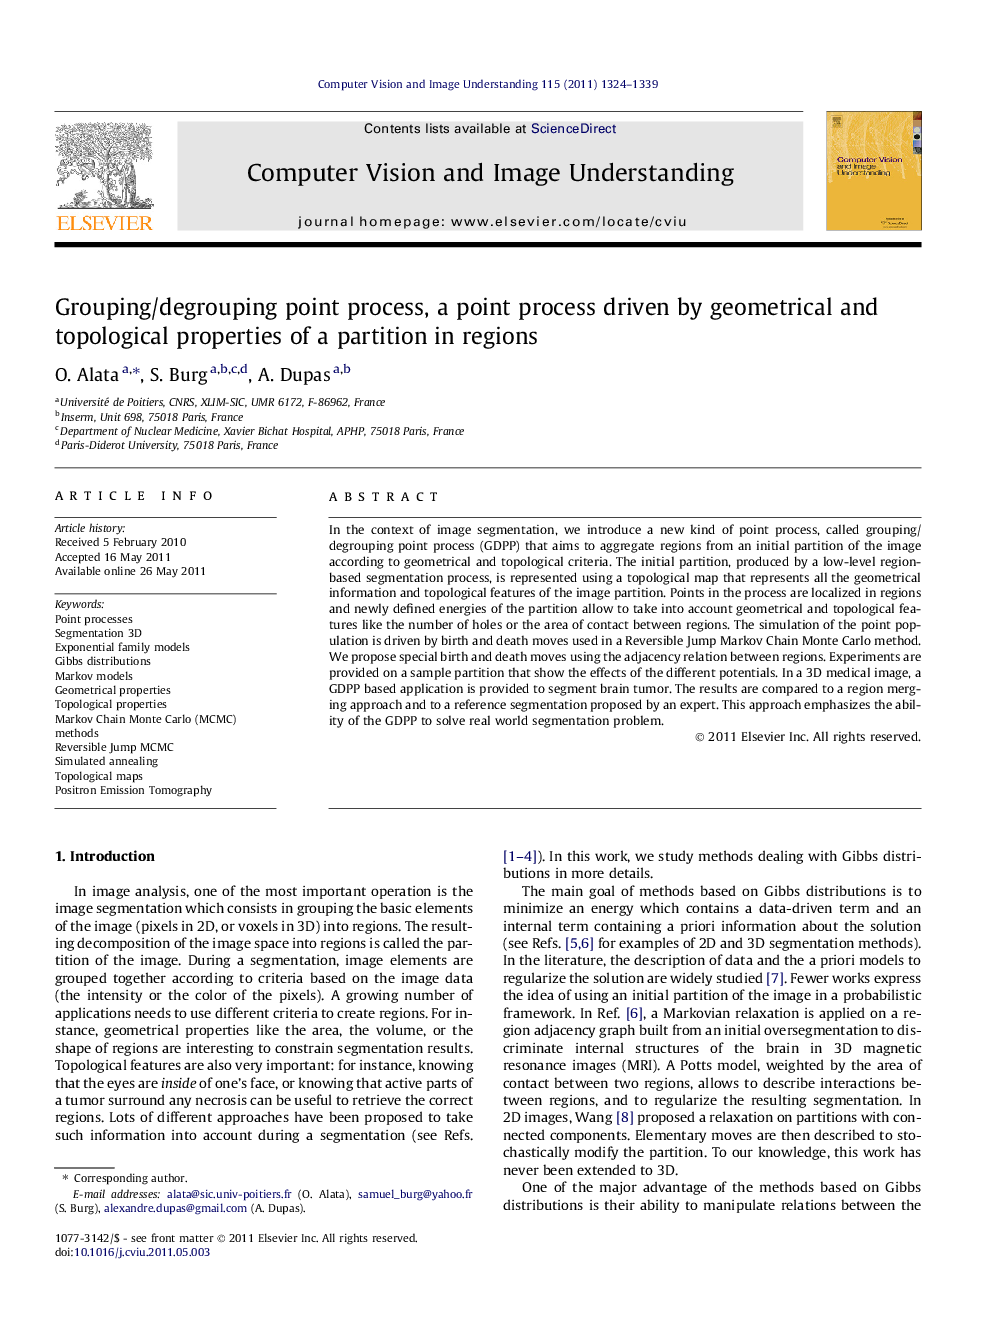 Grouping/degrouping point process, a point process driven by geometrical and topological properties of a partition in regions